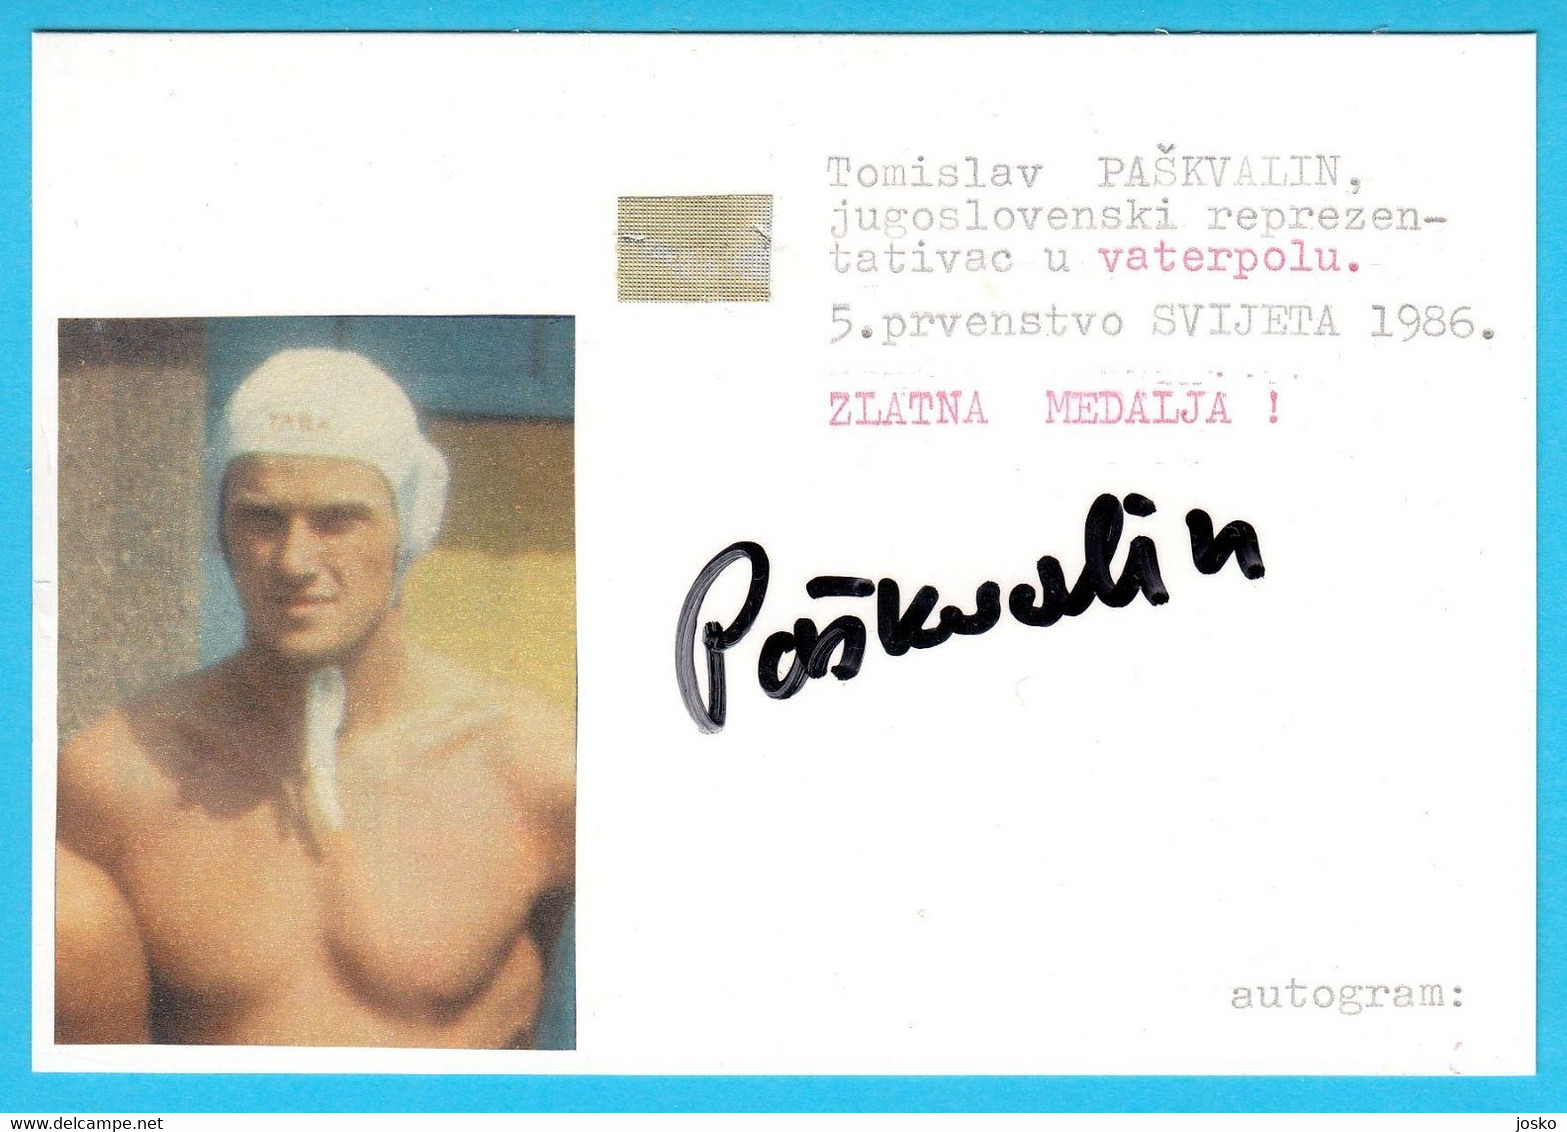 TOMISLAV PASKVALIN - Yugoslavia Water Polo Team Winner Of TWO GOLD MEDALS On Olympic Games 1984 And 1988 - Autógrafos